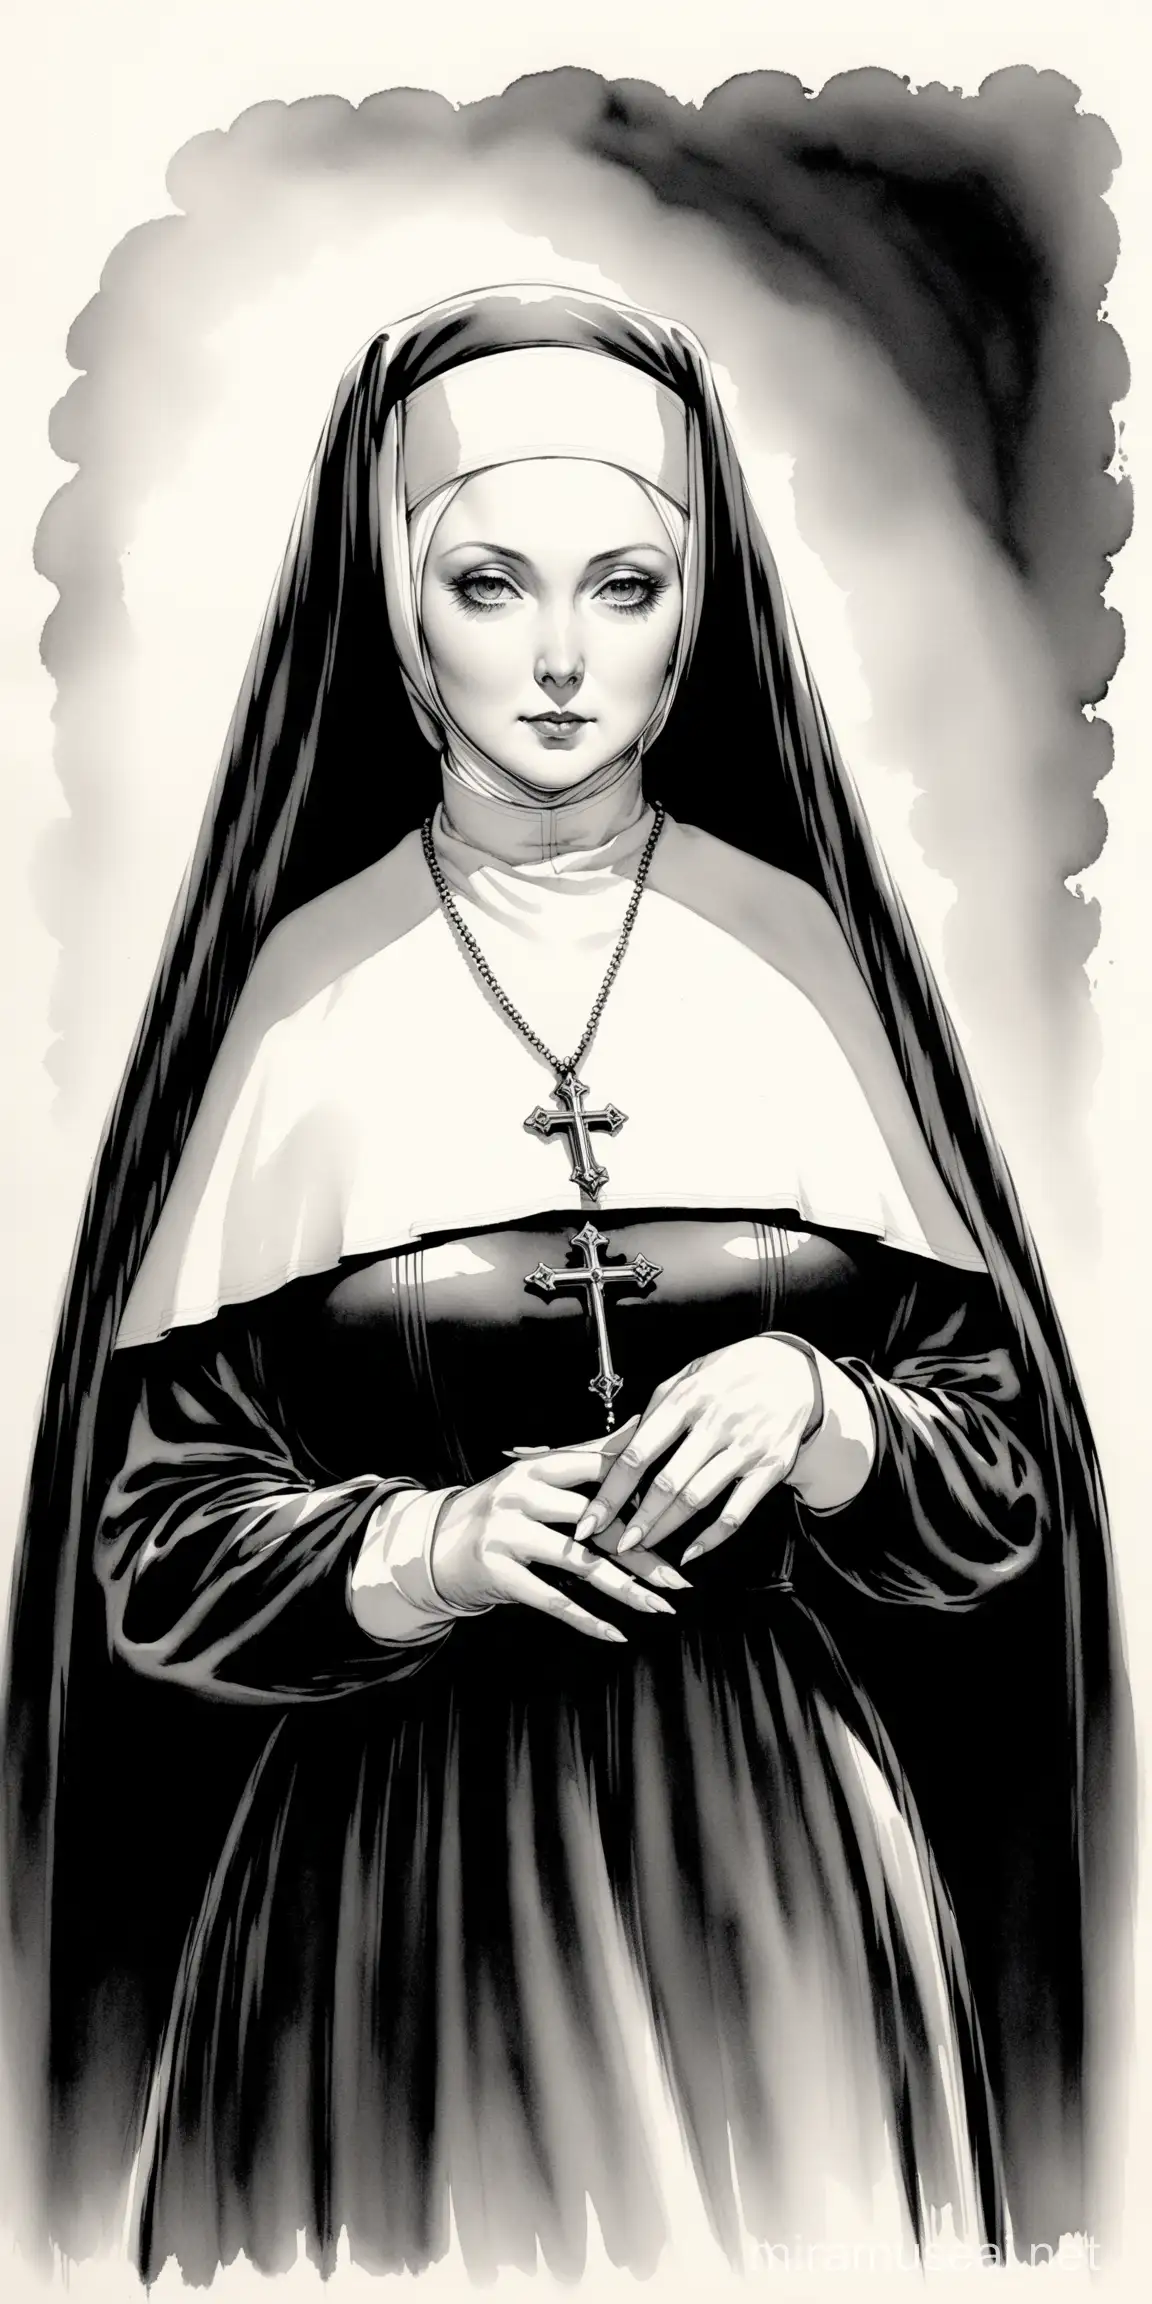 Victorian Era Ink Painting of a Mature Nun in Black and White